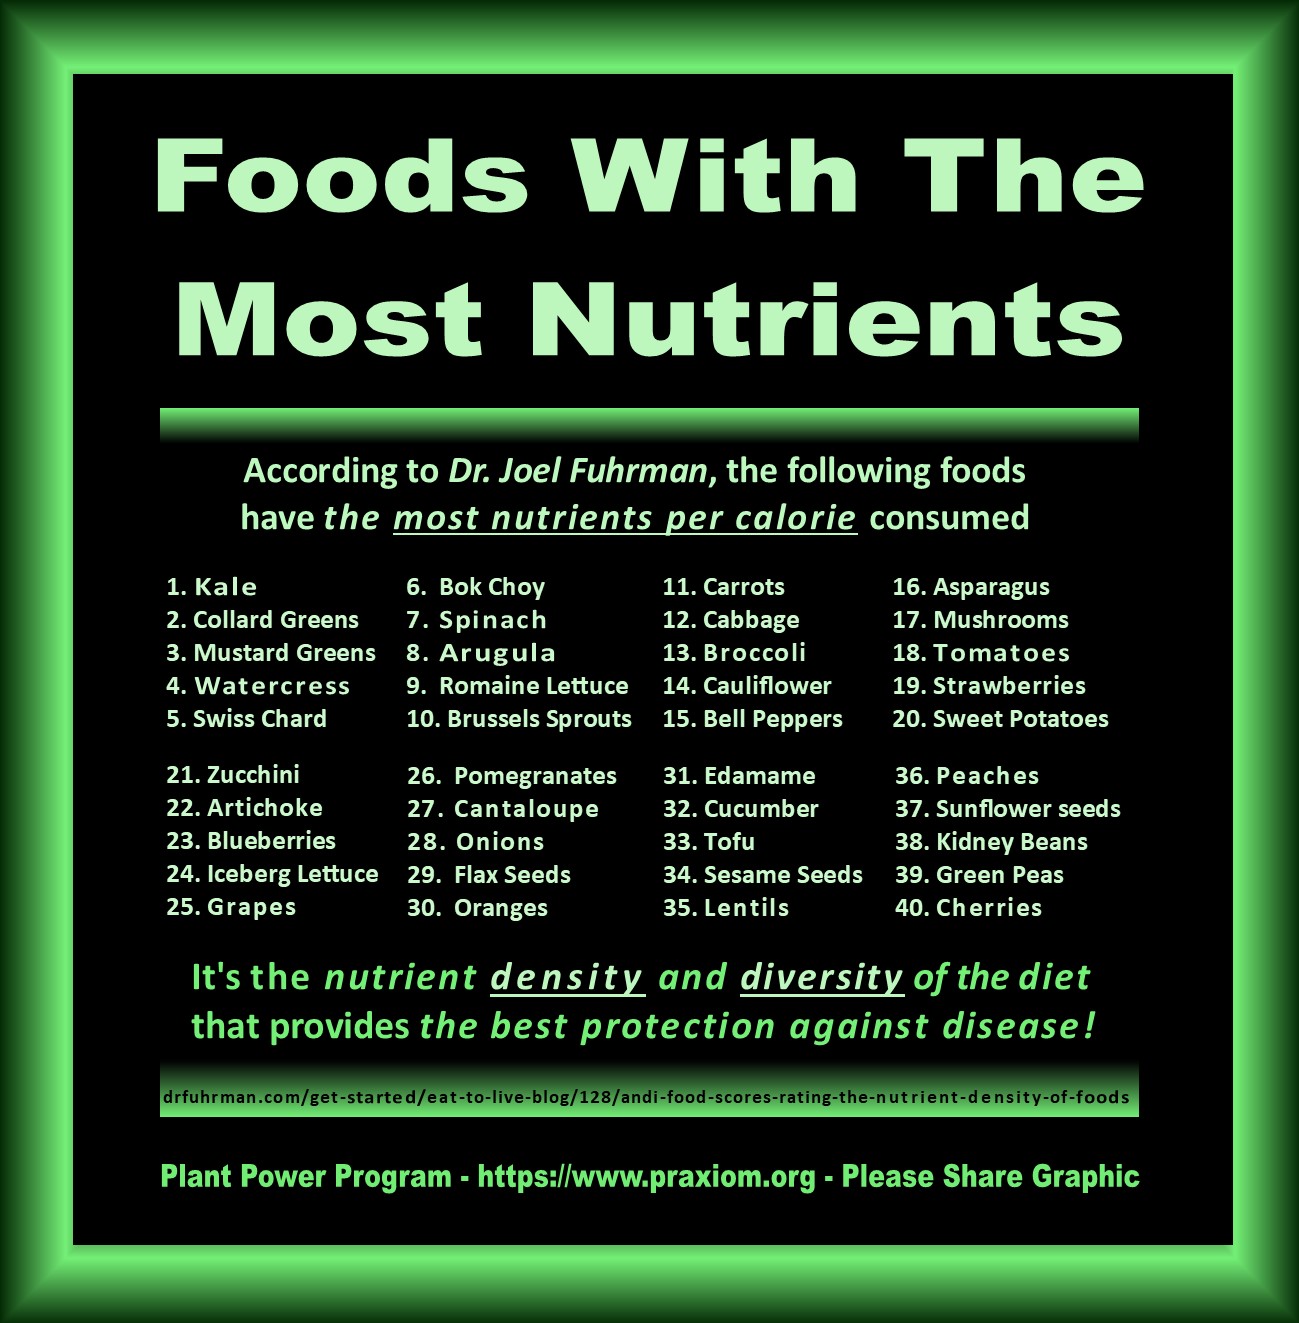 Foods with the Most Nutrients - Dr. Joel Fuhrman